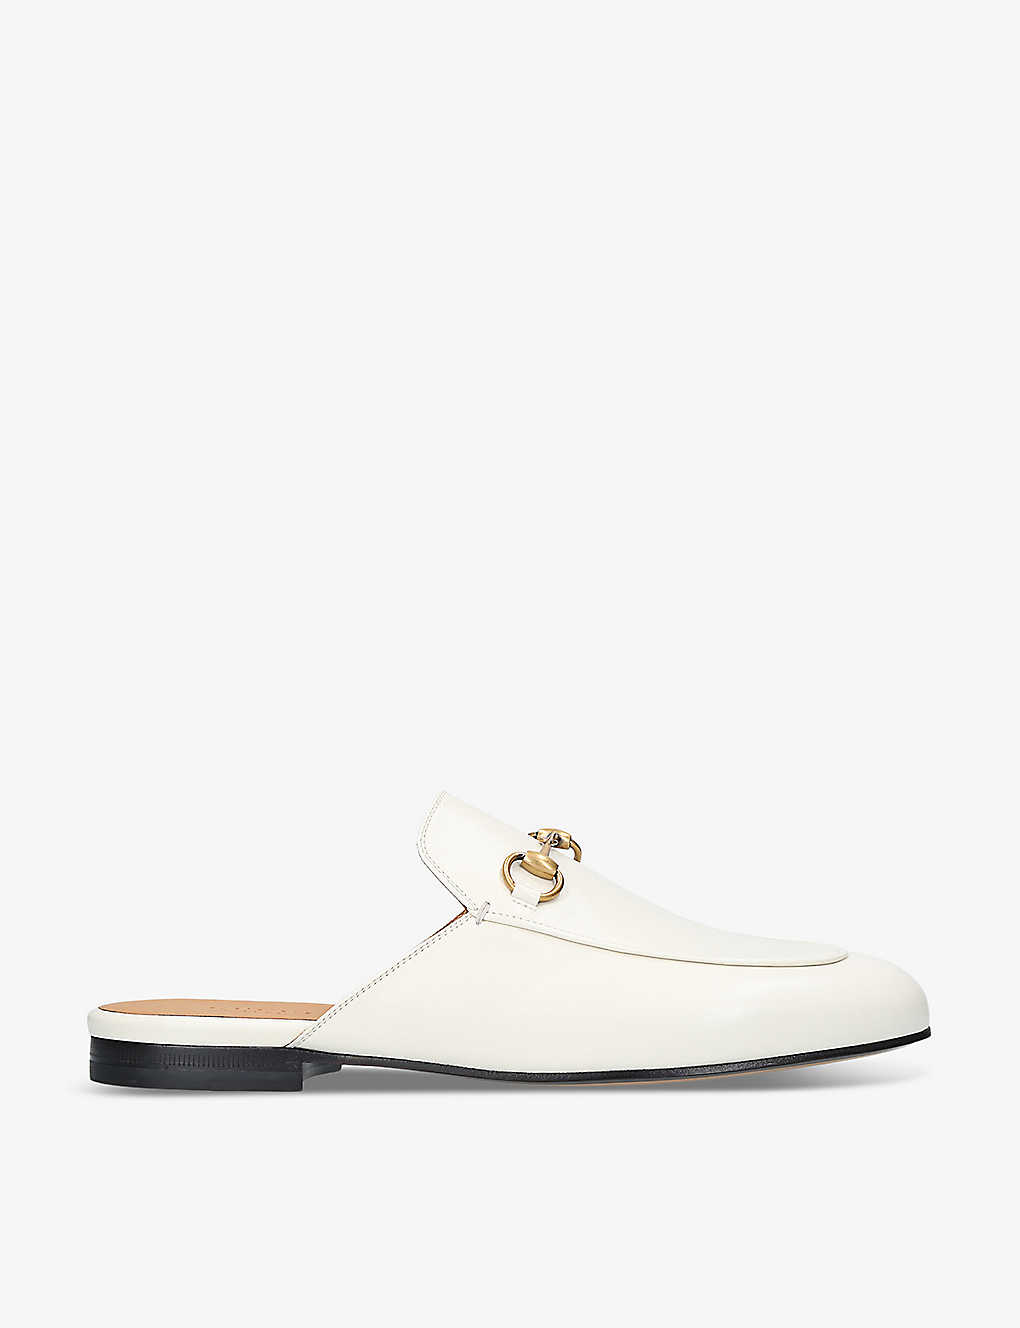 GUCCI - Princetown leather slippers 